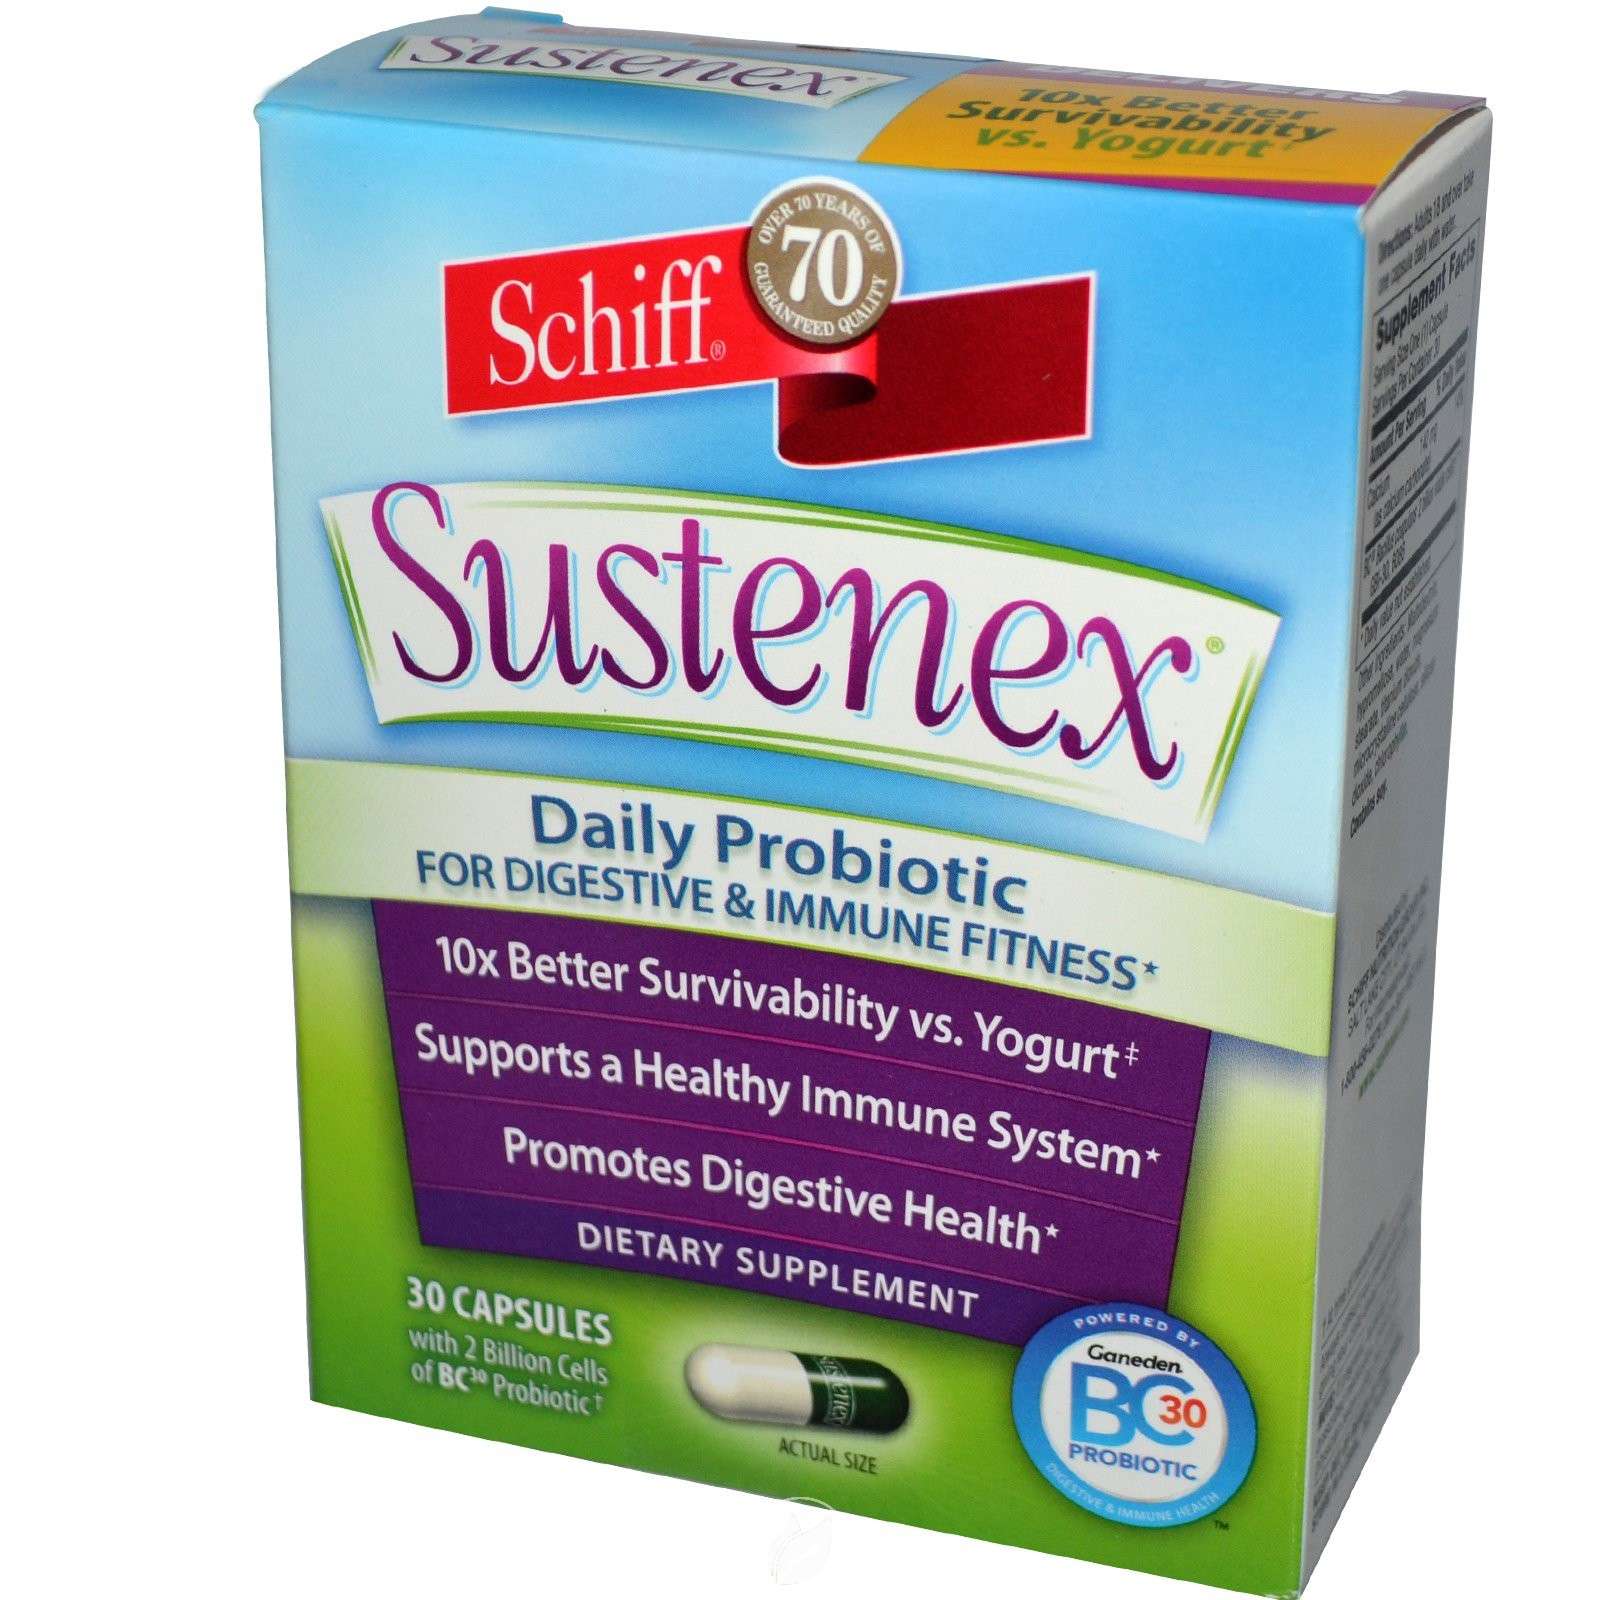 Schiff Digestive Advantage Daily Probiotic 30 Capsules 11/21, Pack of 2 ...